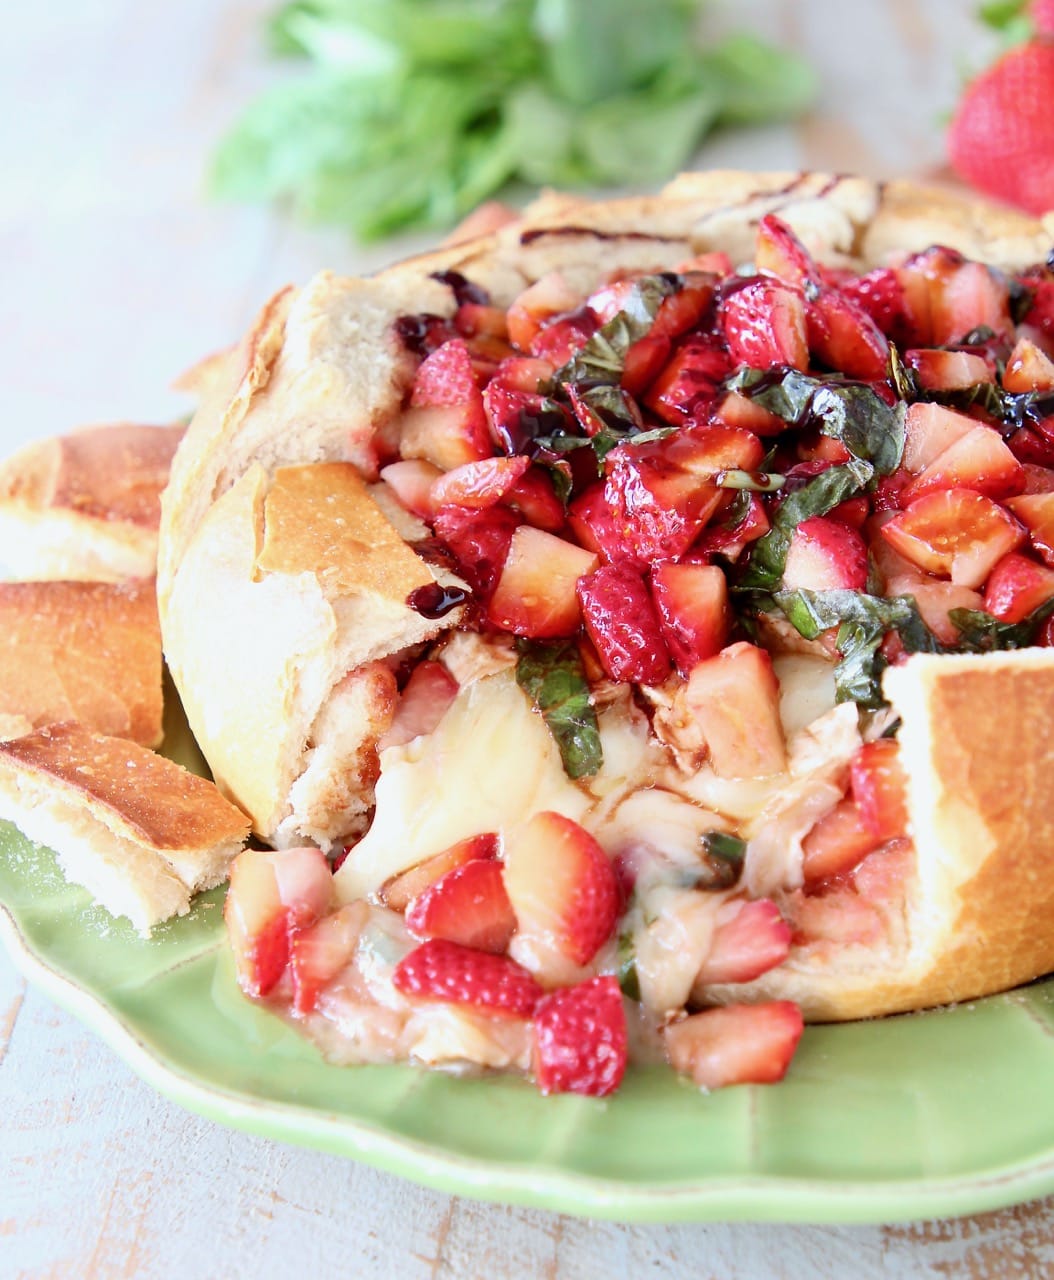 Baked Brie in Sourdough Bread Bowl with Strawberries and Balsamic Glaze